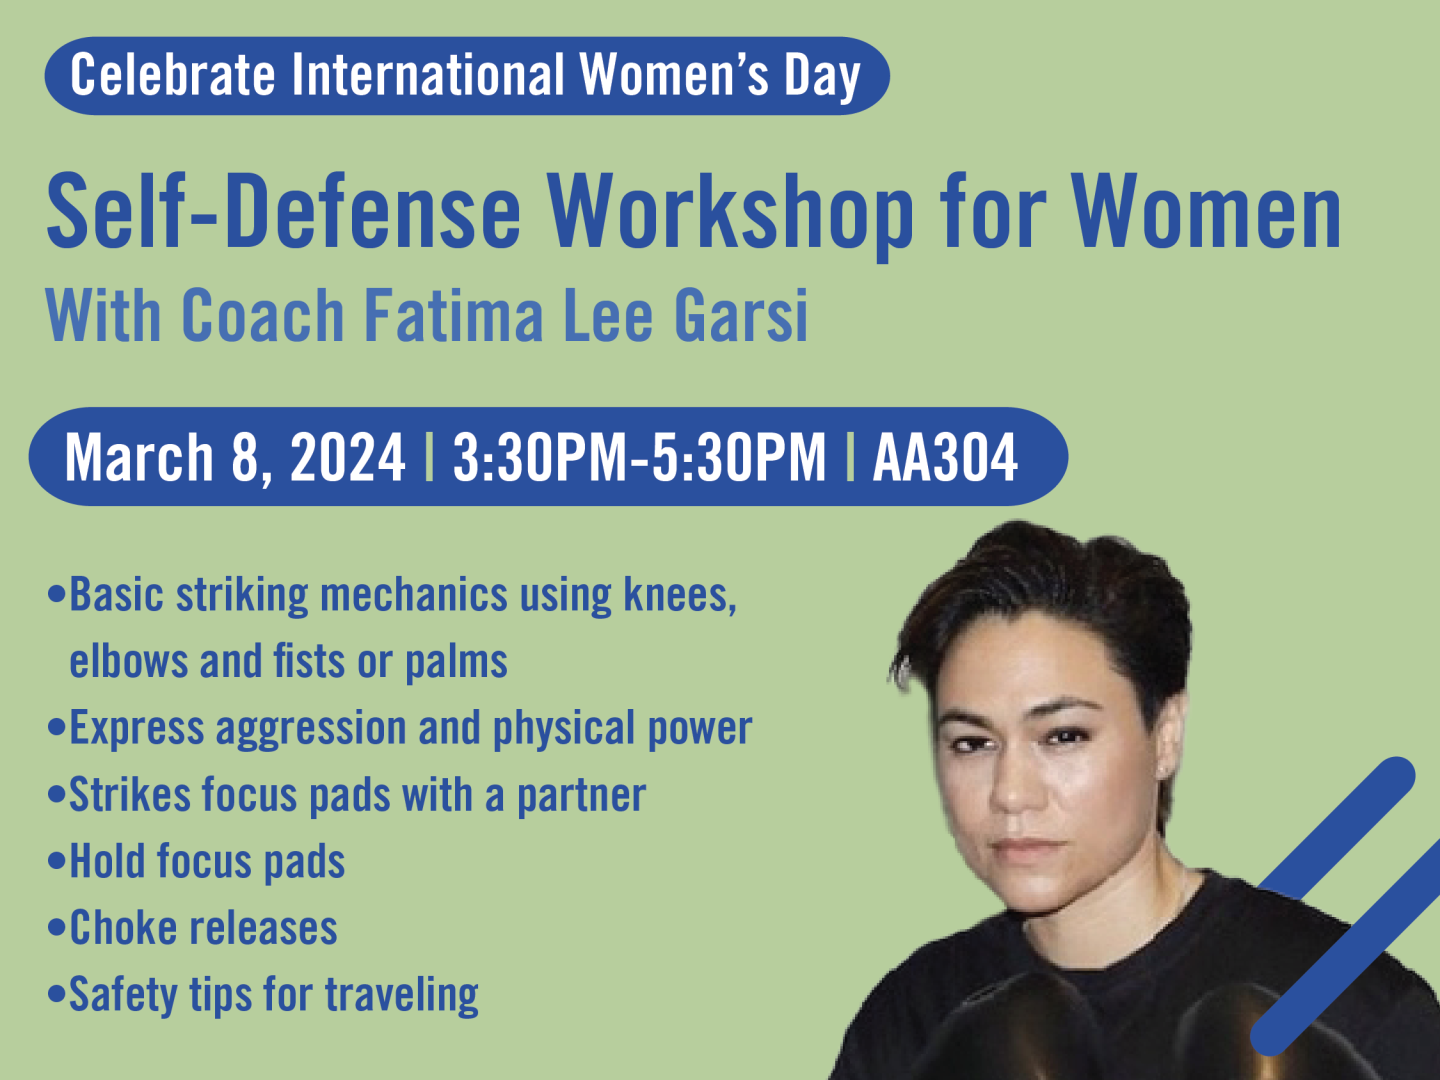 Self Defense Workshop with Coach Fatima Lee Garsi, event detail listed on the webpage. Bottom right with a headshot of Fatima Lee Garsi